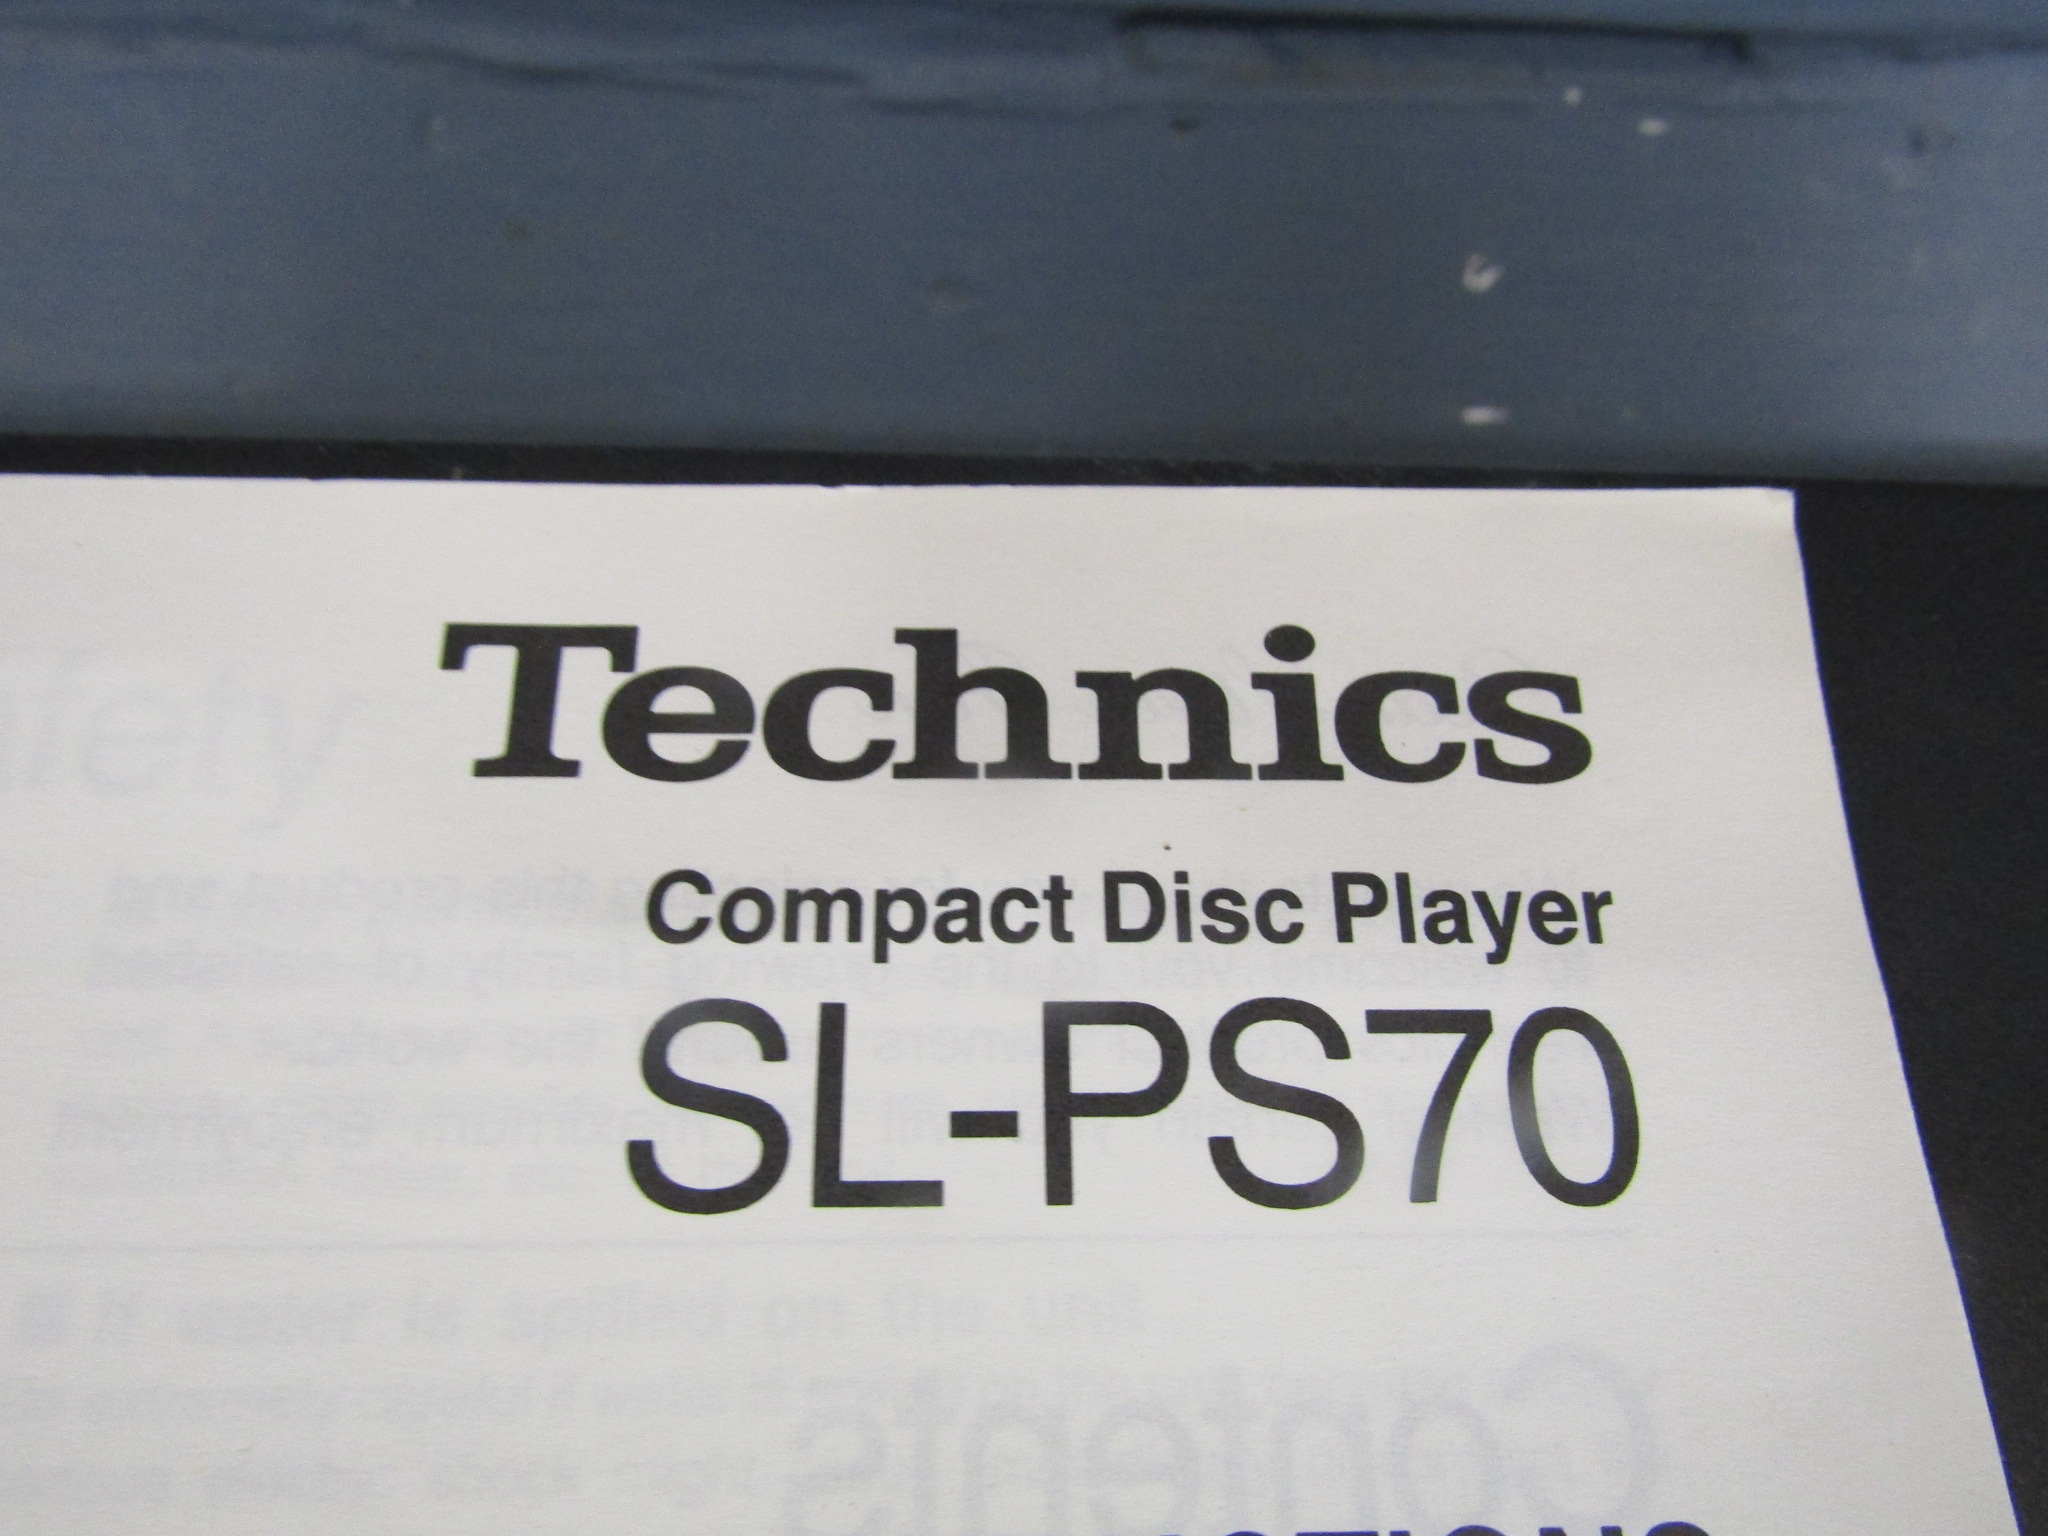 Technics SL-PS70 compact disc player with remote and manual from a house clearance - Image 3 of 3